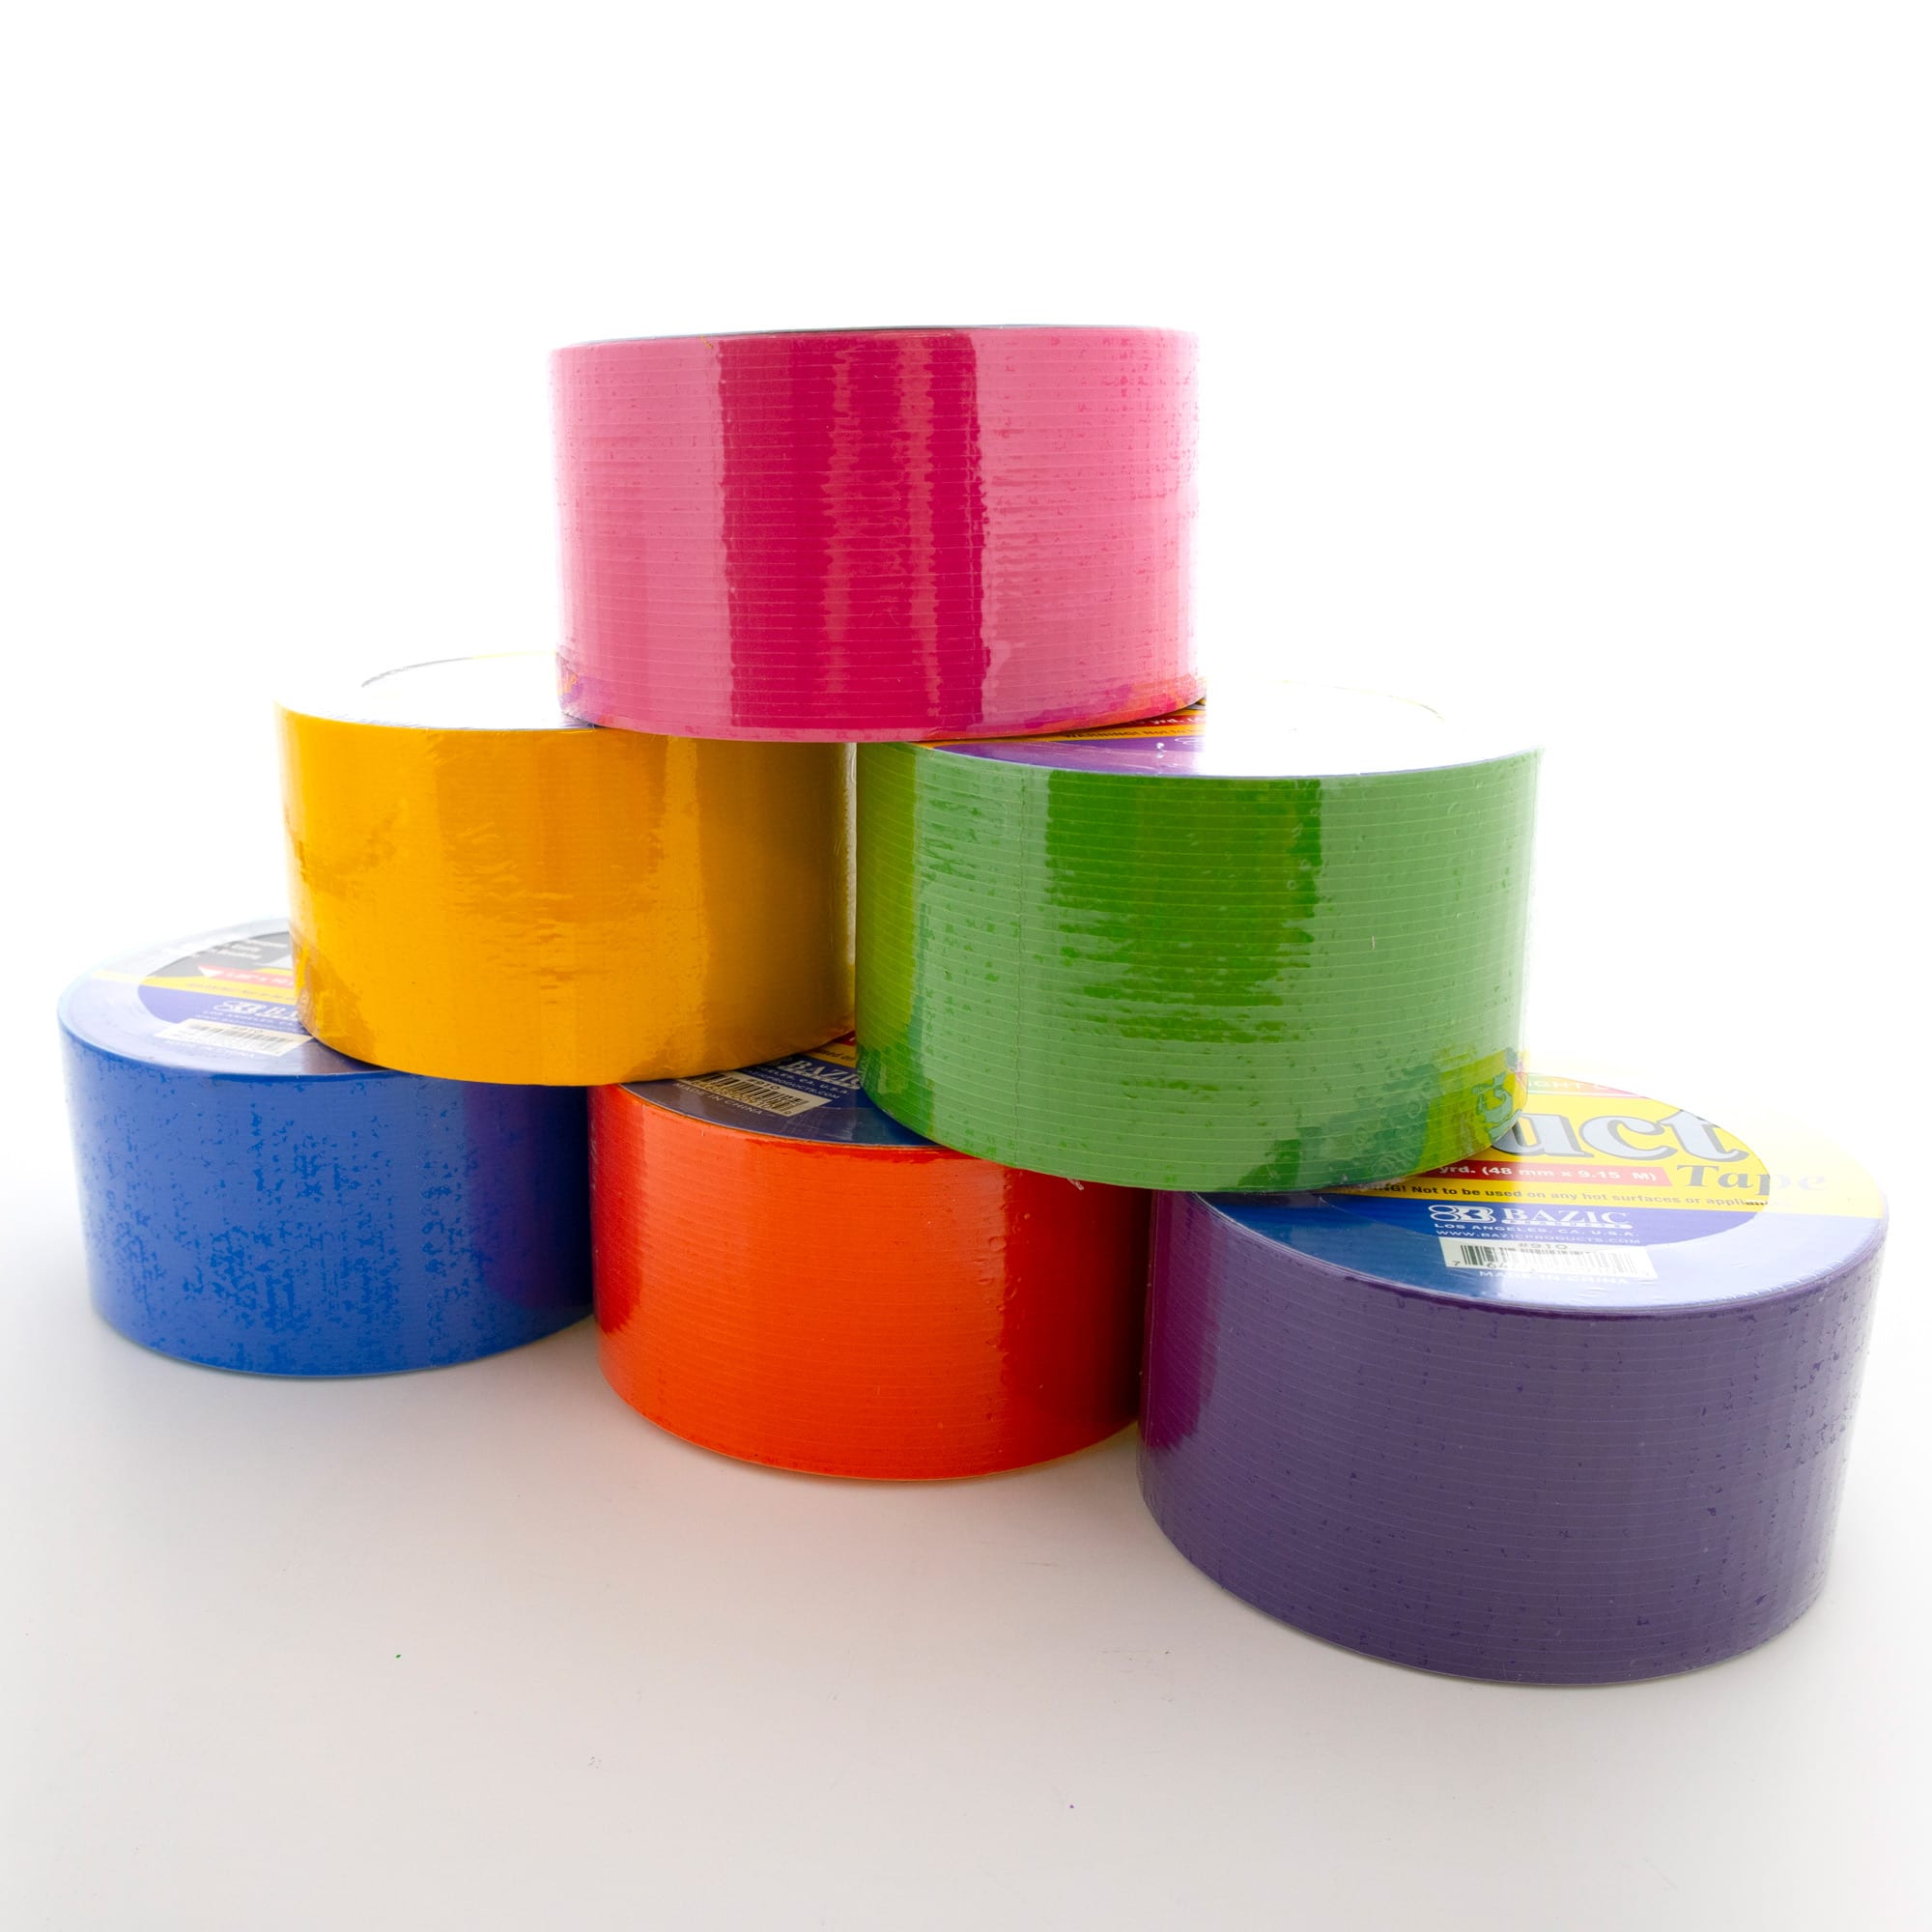 978 Each Bazic 1.89 X 10 Yard Colored Duct Tape Silver 